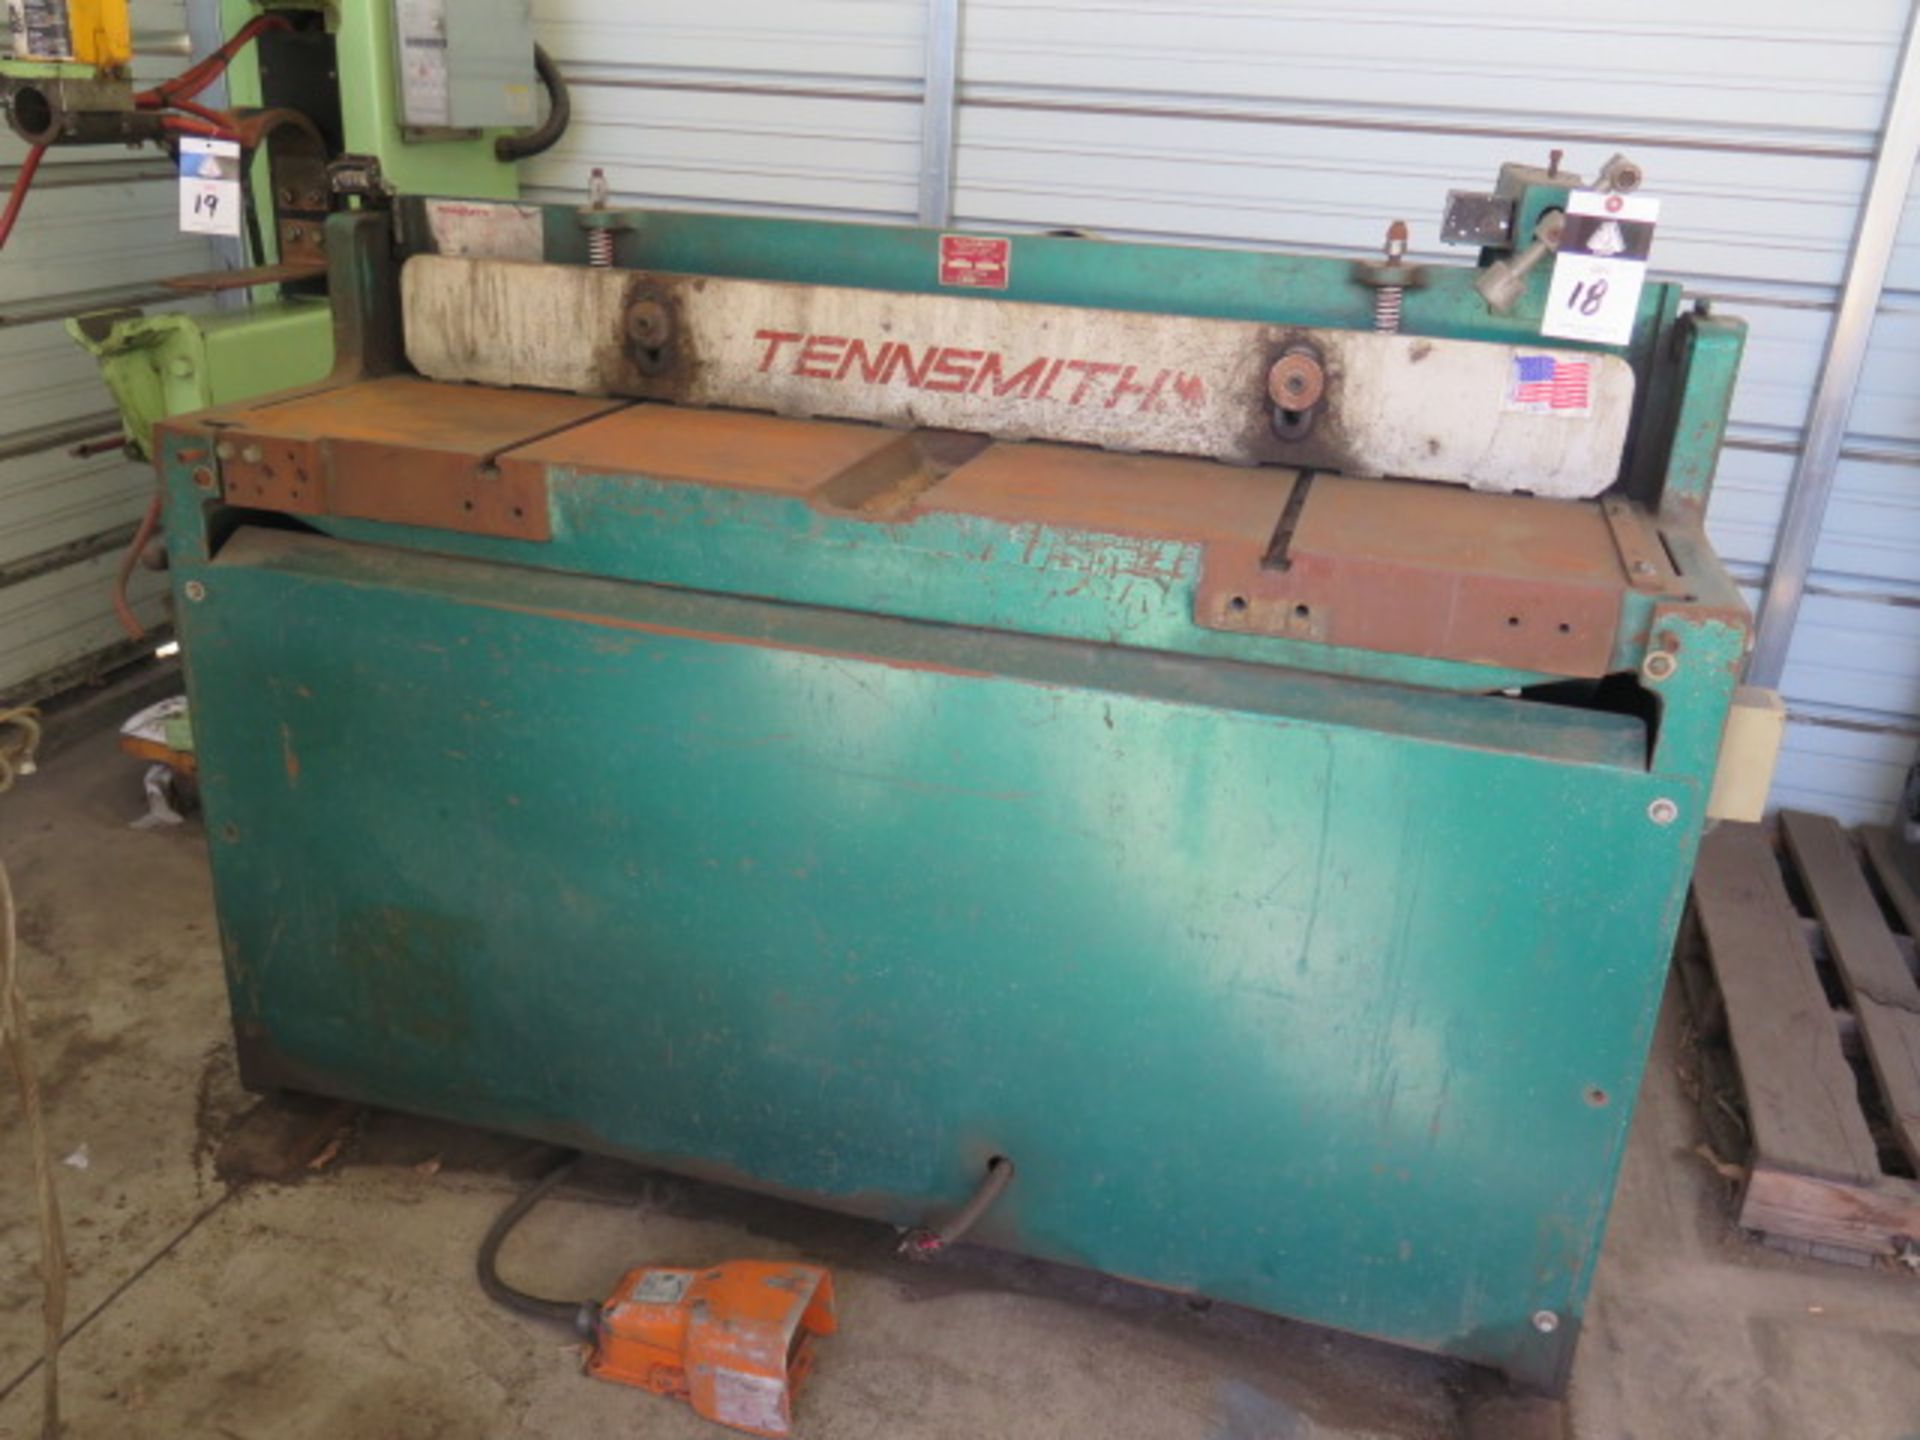 Tennsmith H52 52” Power Shear s/n 13948 w/ Dial Back Gauge (SOLD AS-IS - NO WARRANTY)